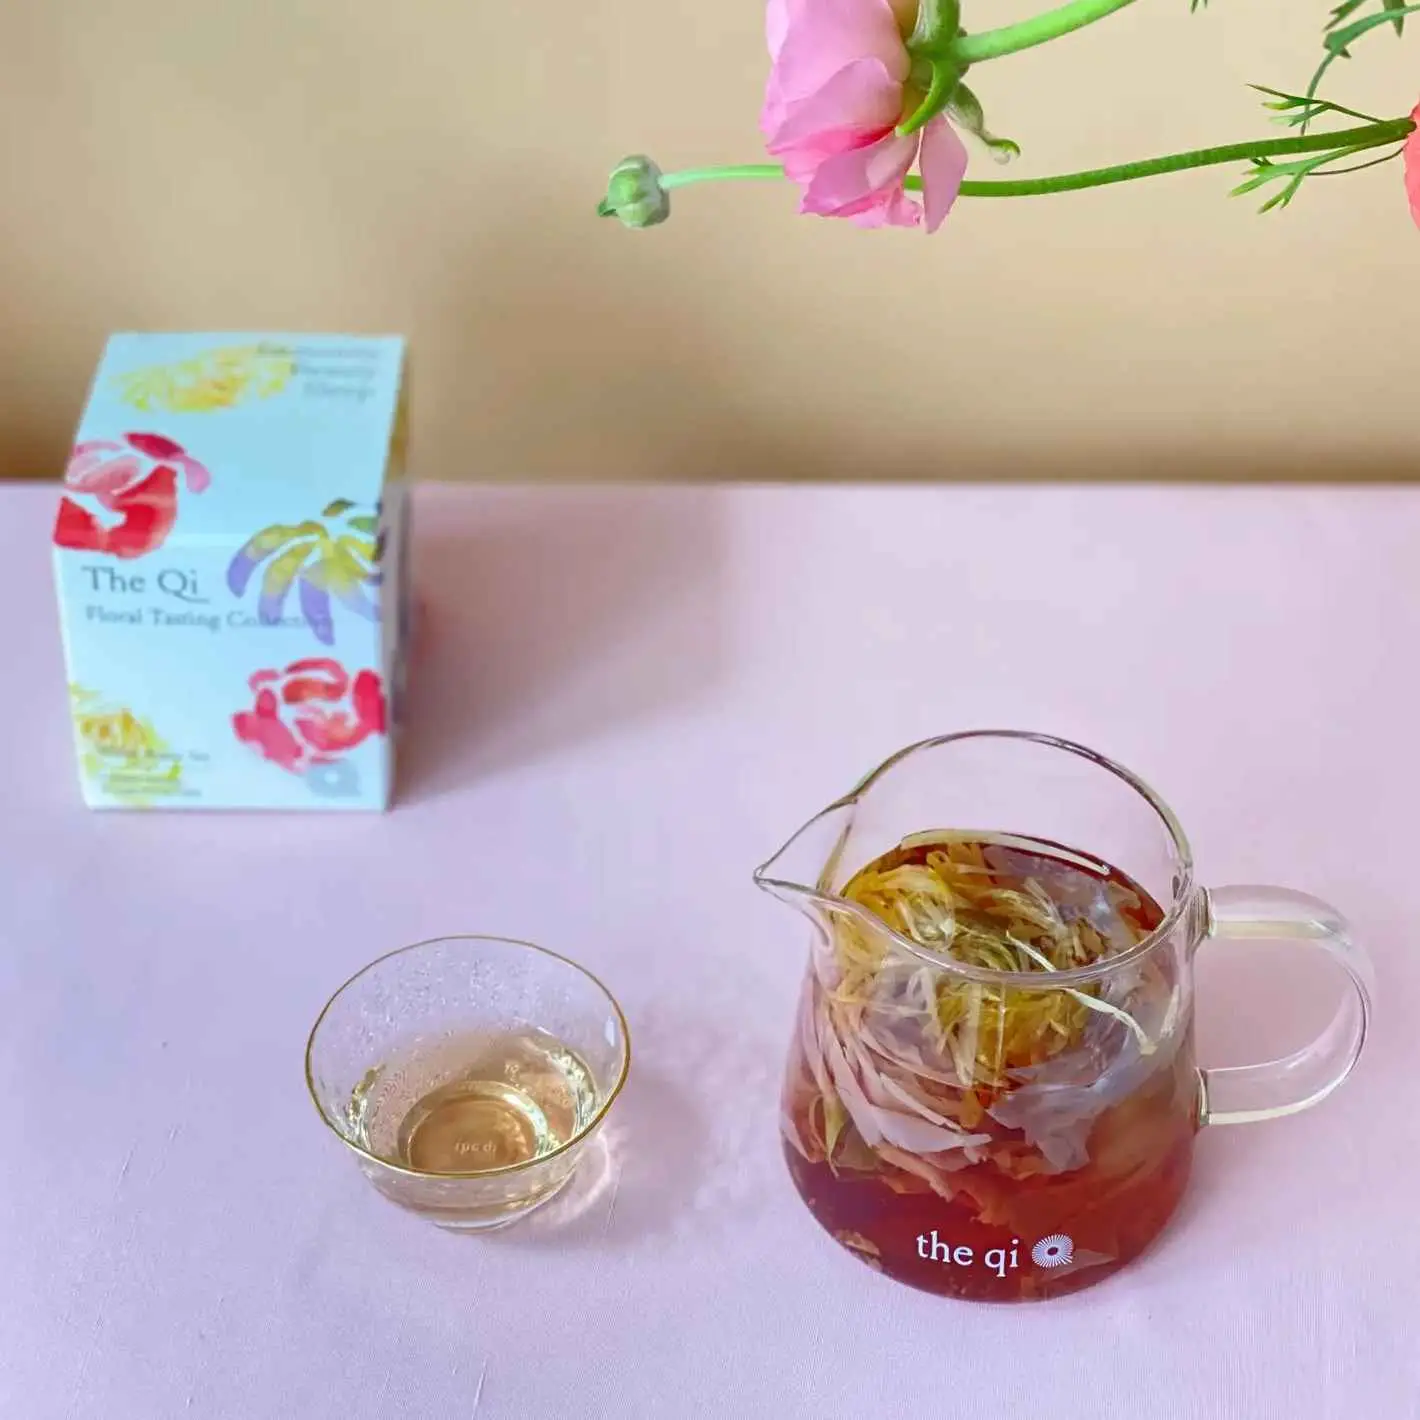 Flower Tea Tasting Collection Delivery